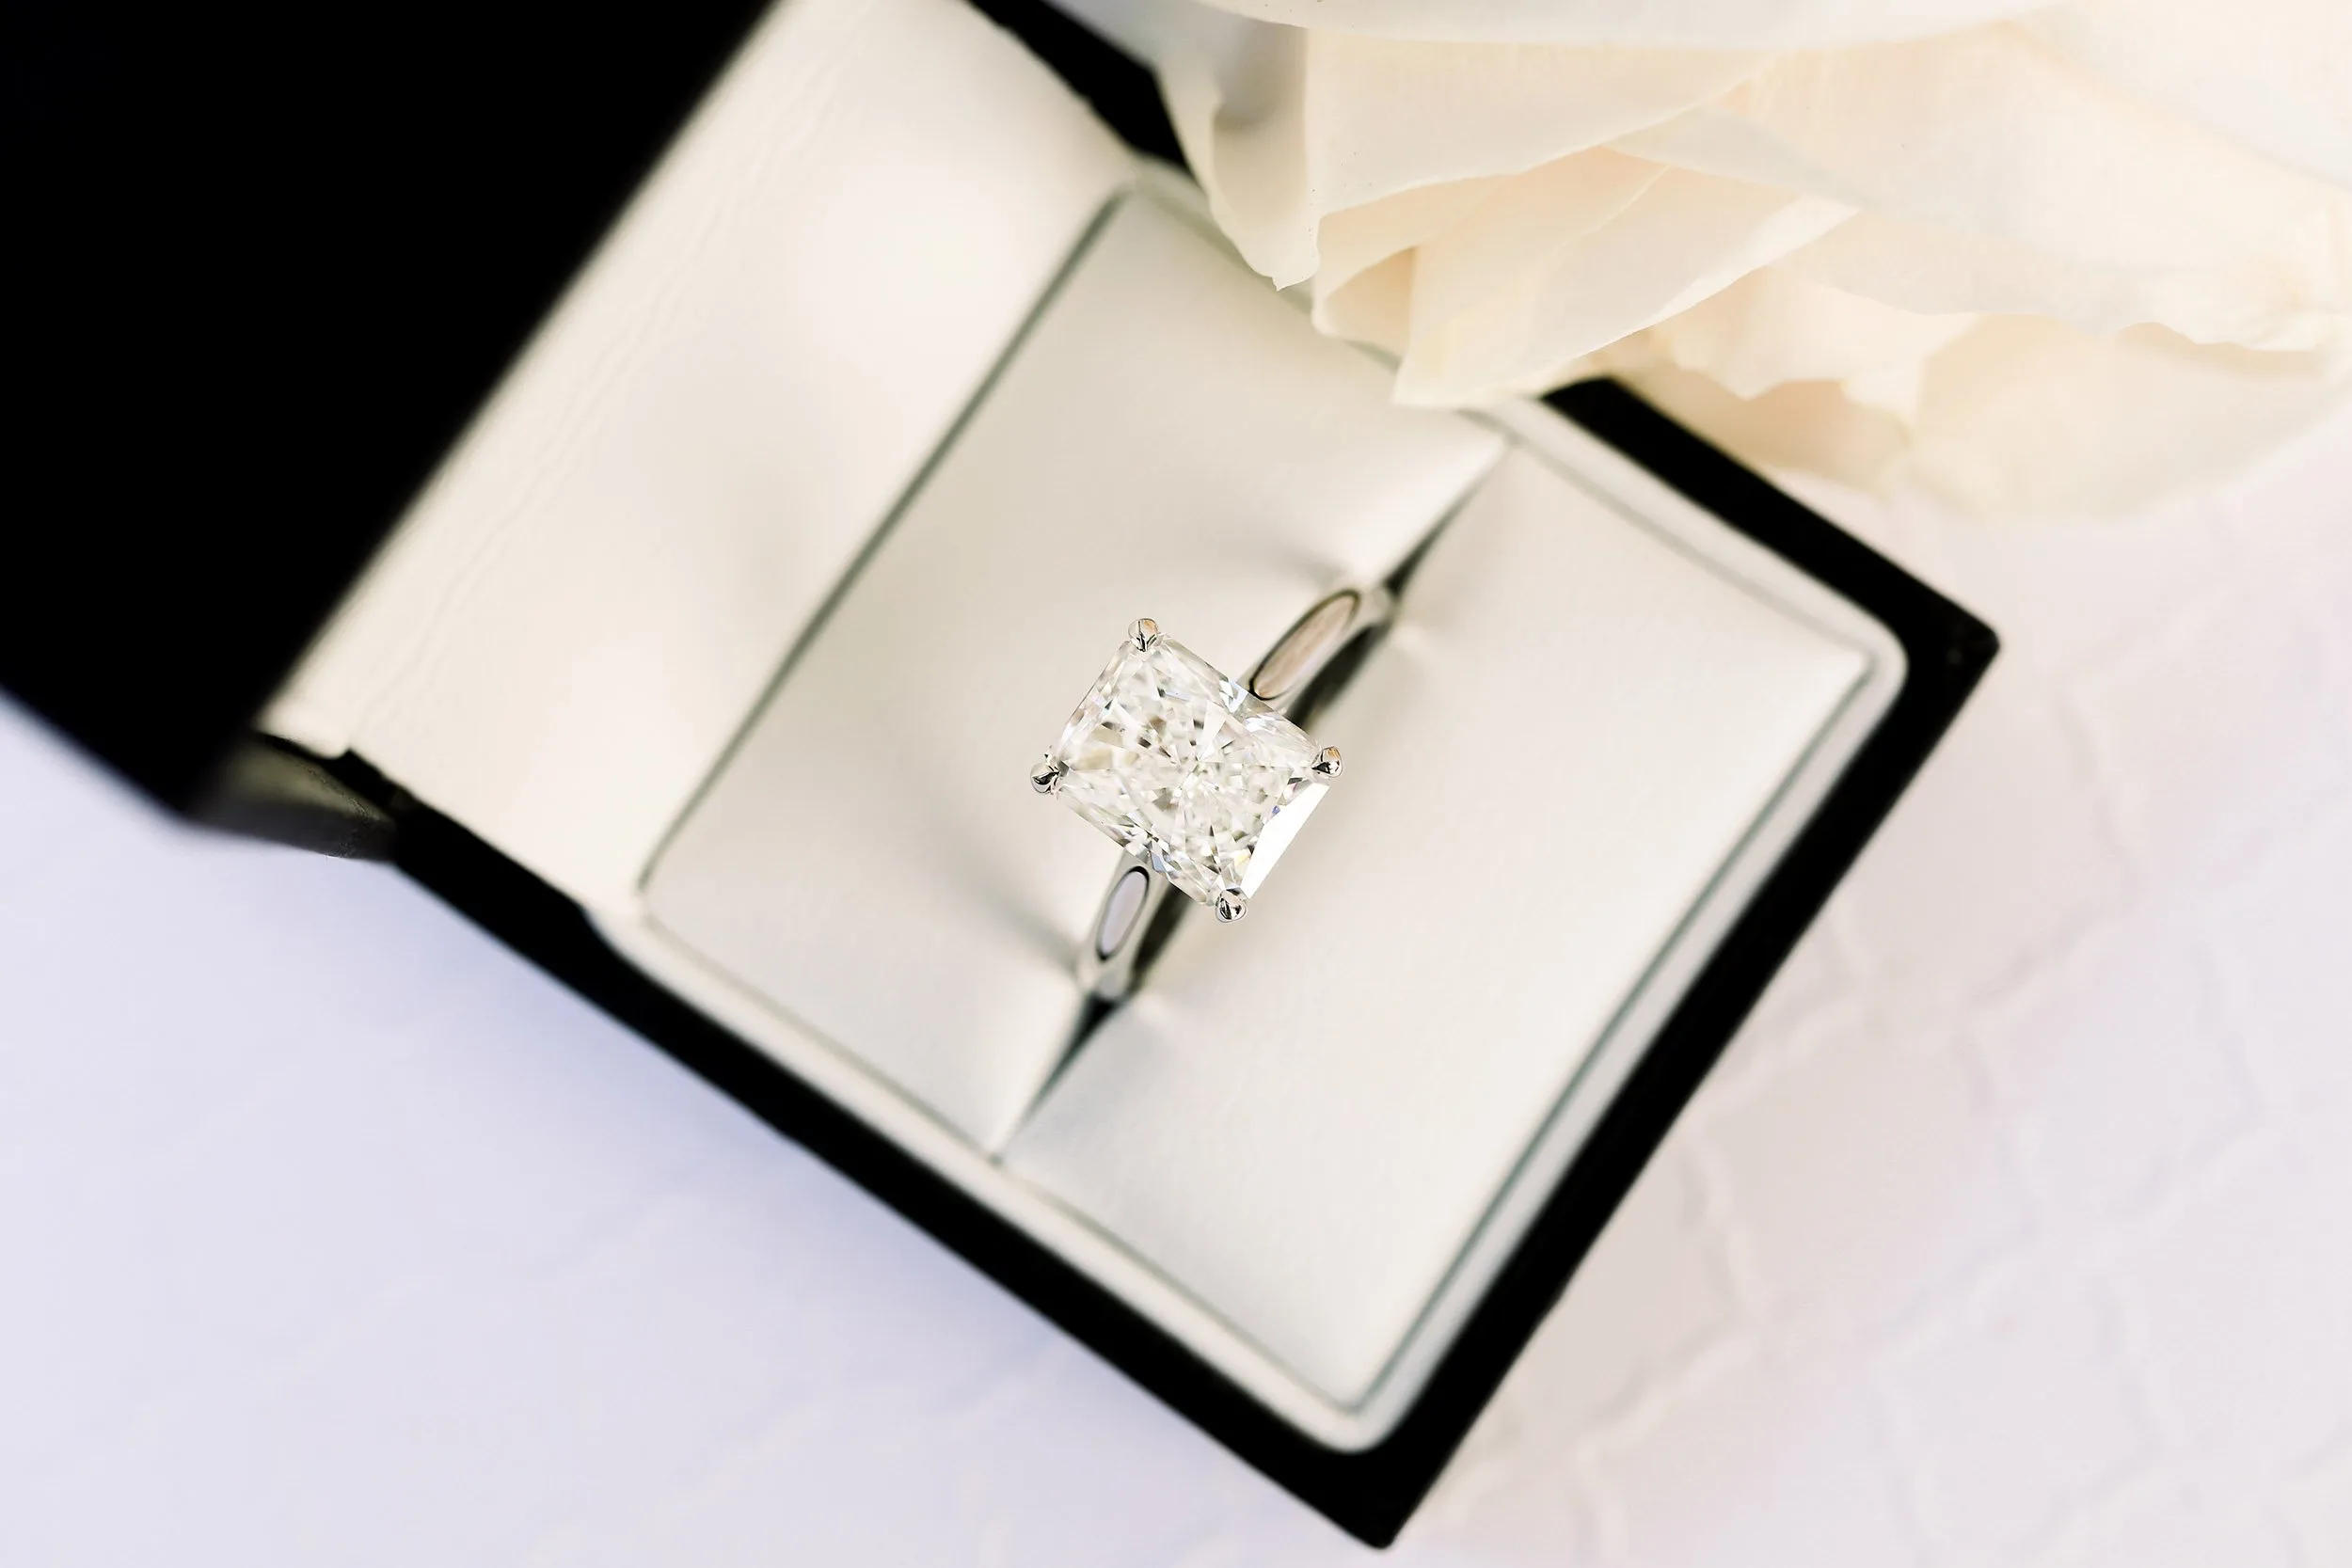 3.5ct radiant cut lab diamond in solitaire setting